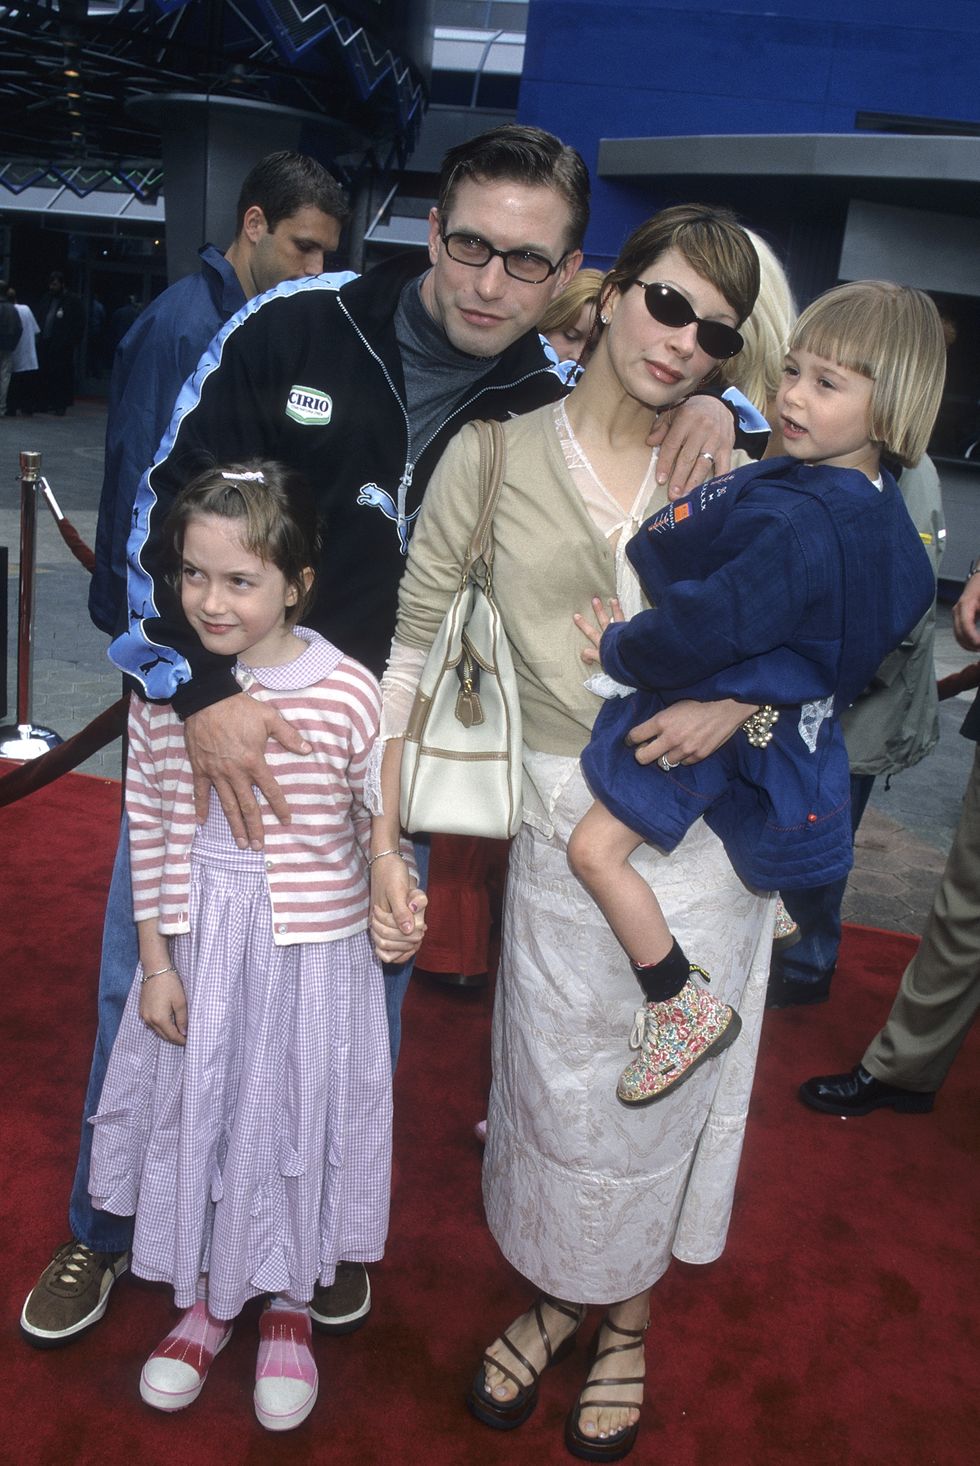 universal city, ca april 15 actor stephen baldwin, wife kennya, and daugters alaia and hailey attend the flintstones in viva rock vegas universal city premiere on april 15, 2000 at cineplex odeon universal city cinemas in universal city, california photo by ron galella, ltdron galella collection via getty images 